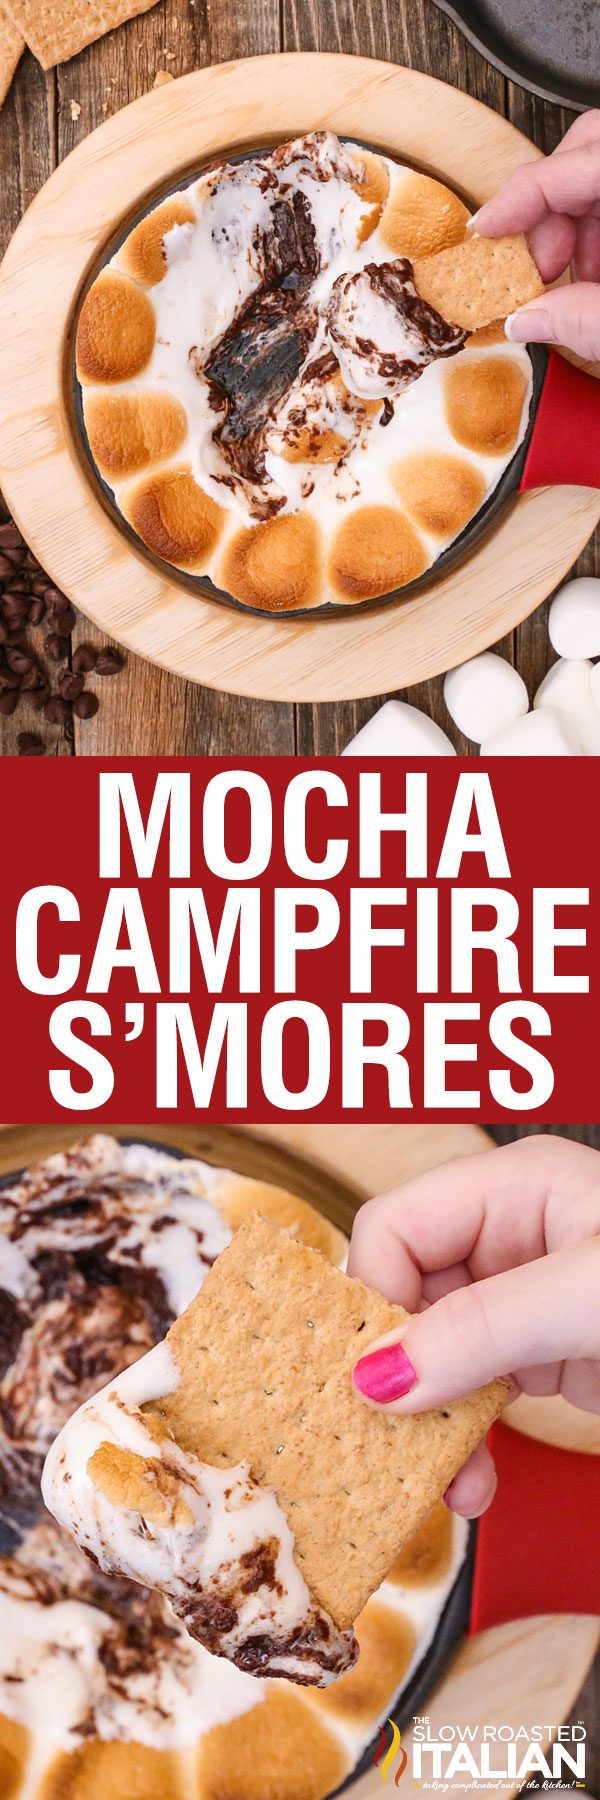 titled image (and shown): mocha campfire s'mores